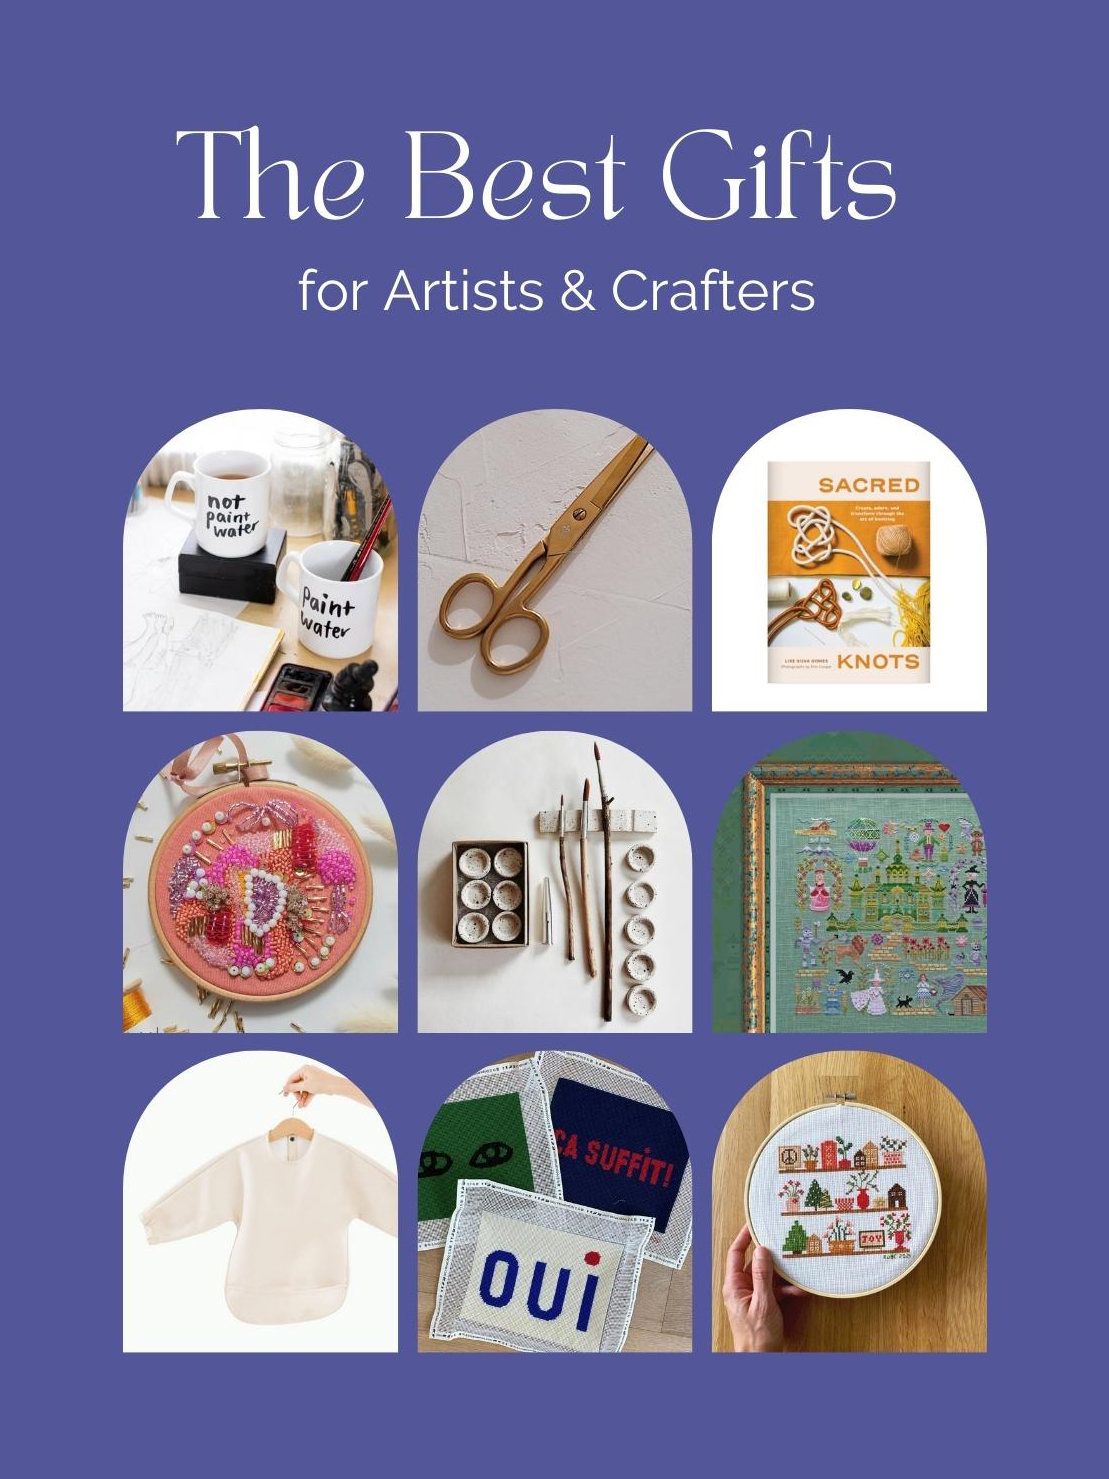 Gifts for young artists - 10 great gift ideas for artistic talent! 